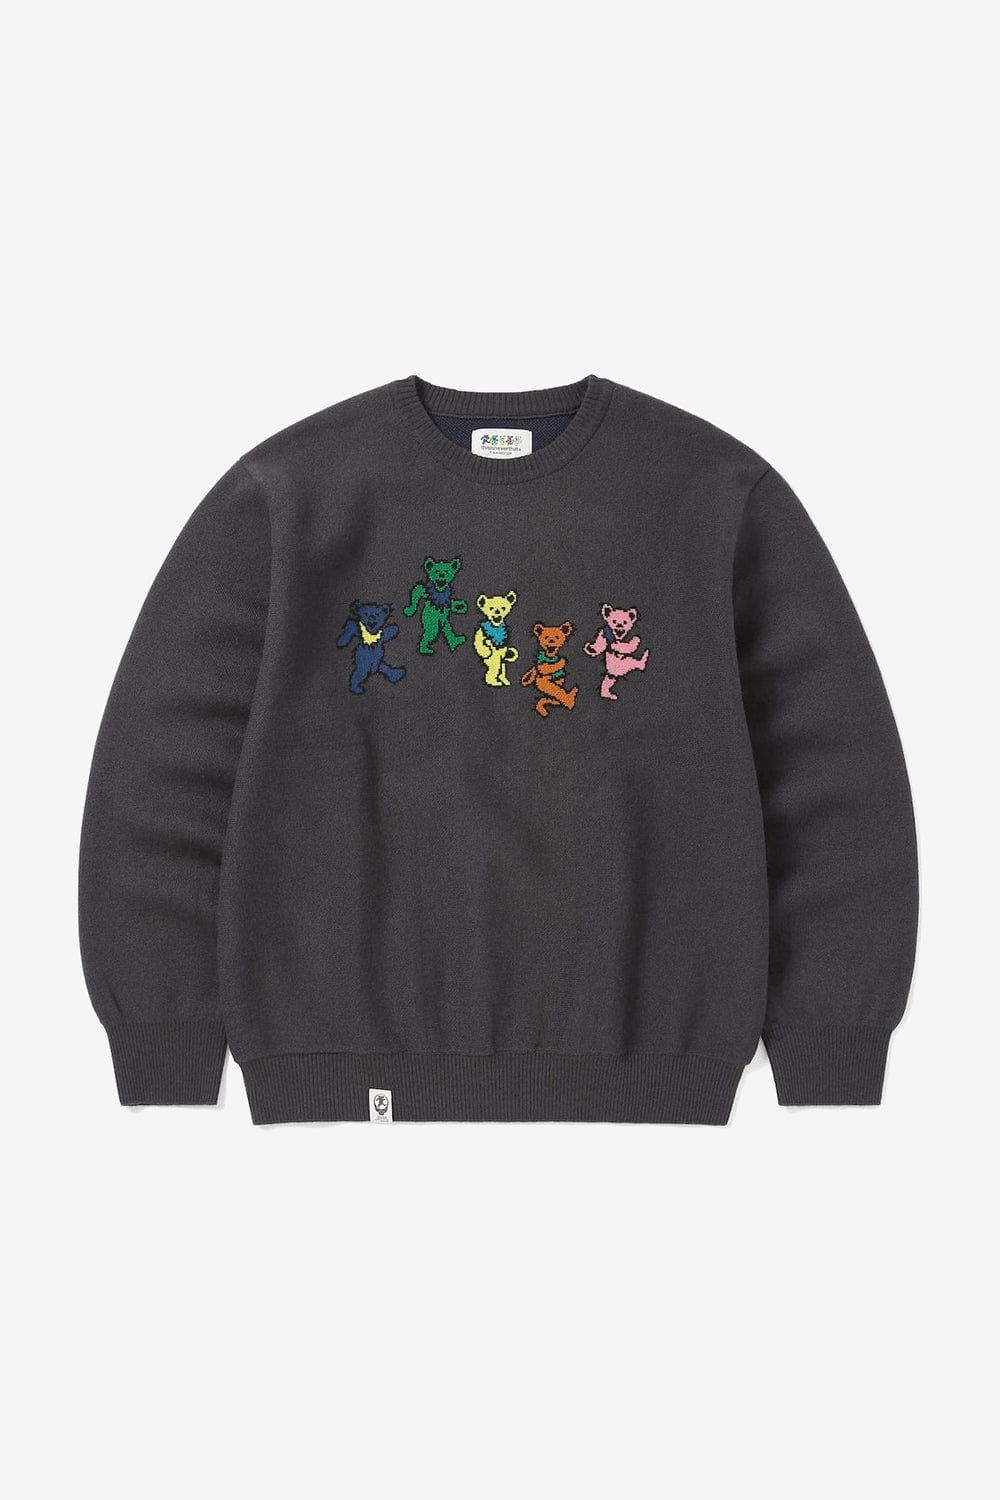 Thisisneverthat Grateful Dead Dancing Bears Knit Sweater